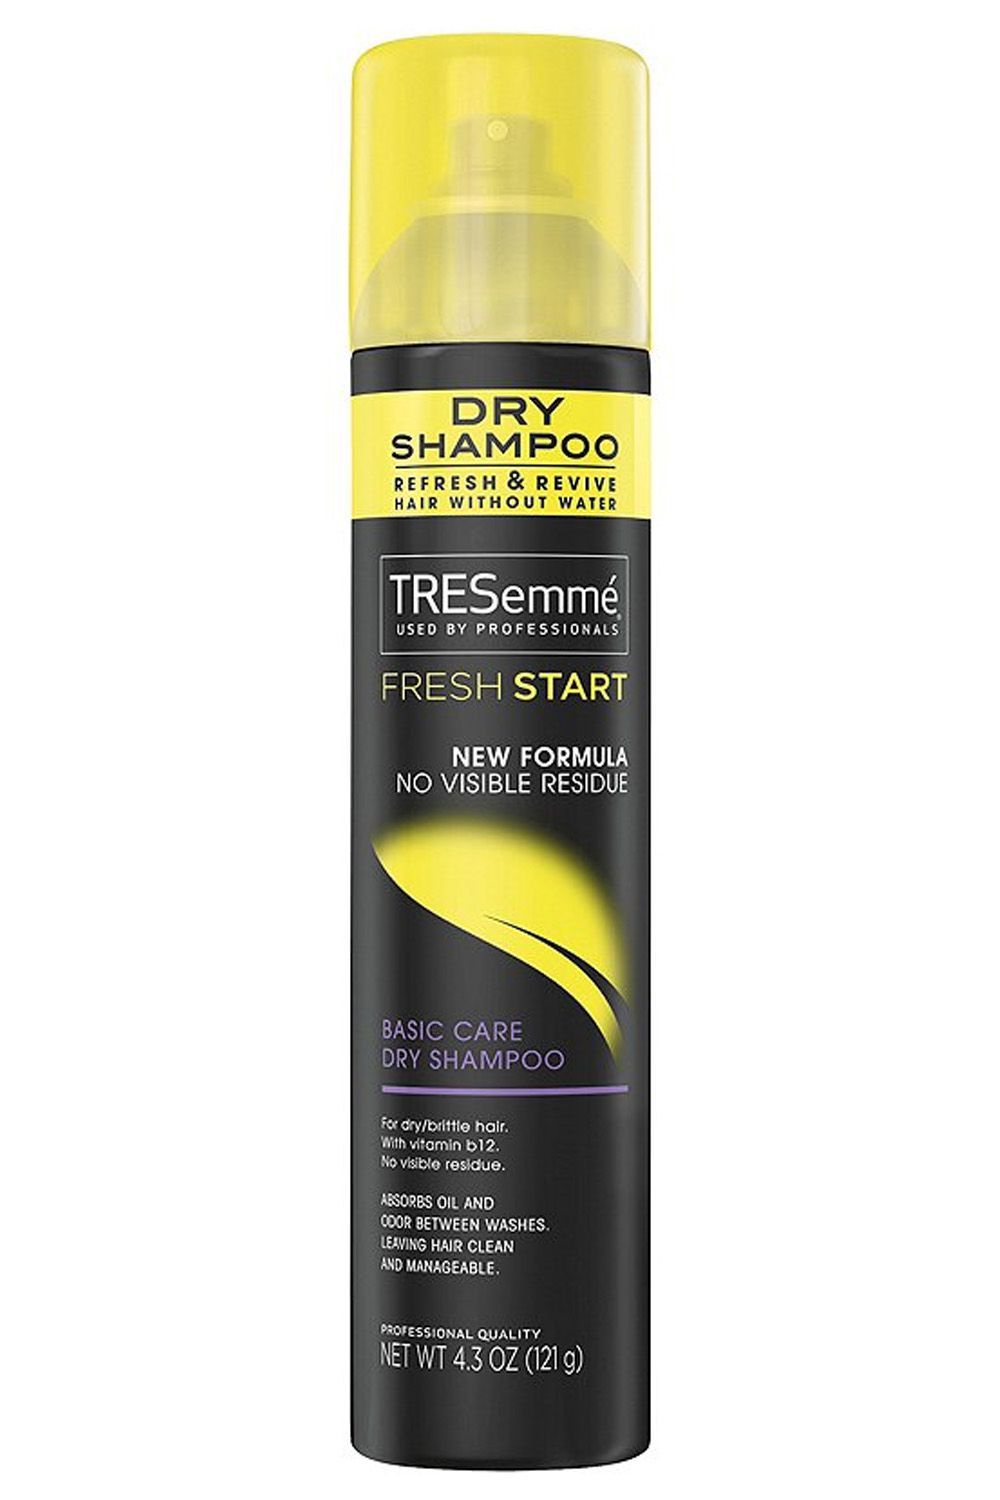 12 Best Dry Shampoos 2022 - Cheap Dry Shampoo to Try